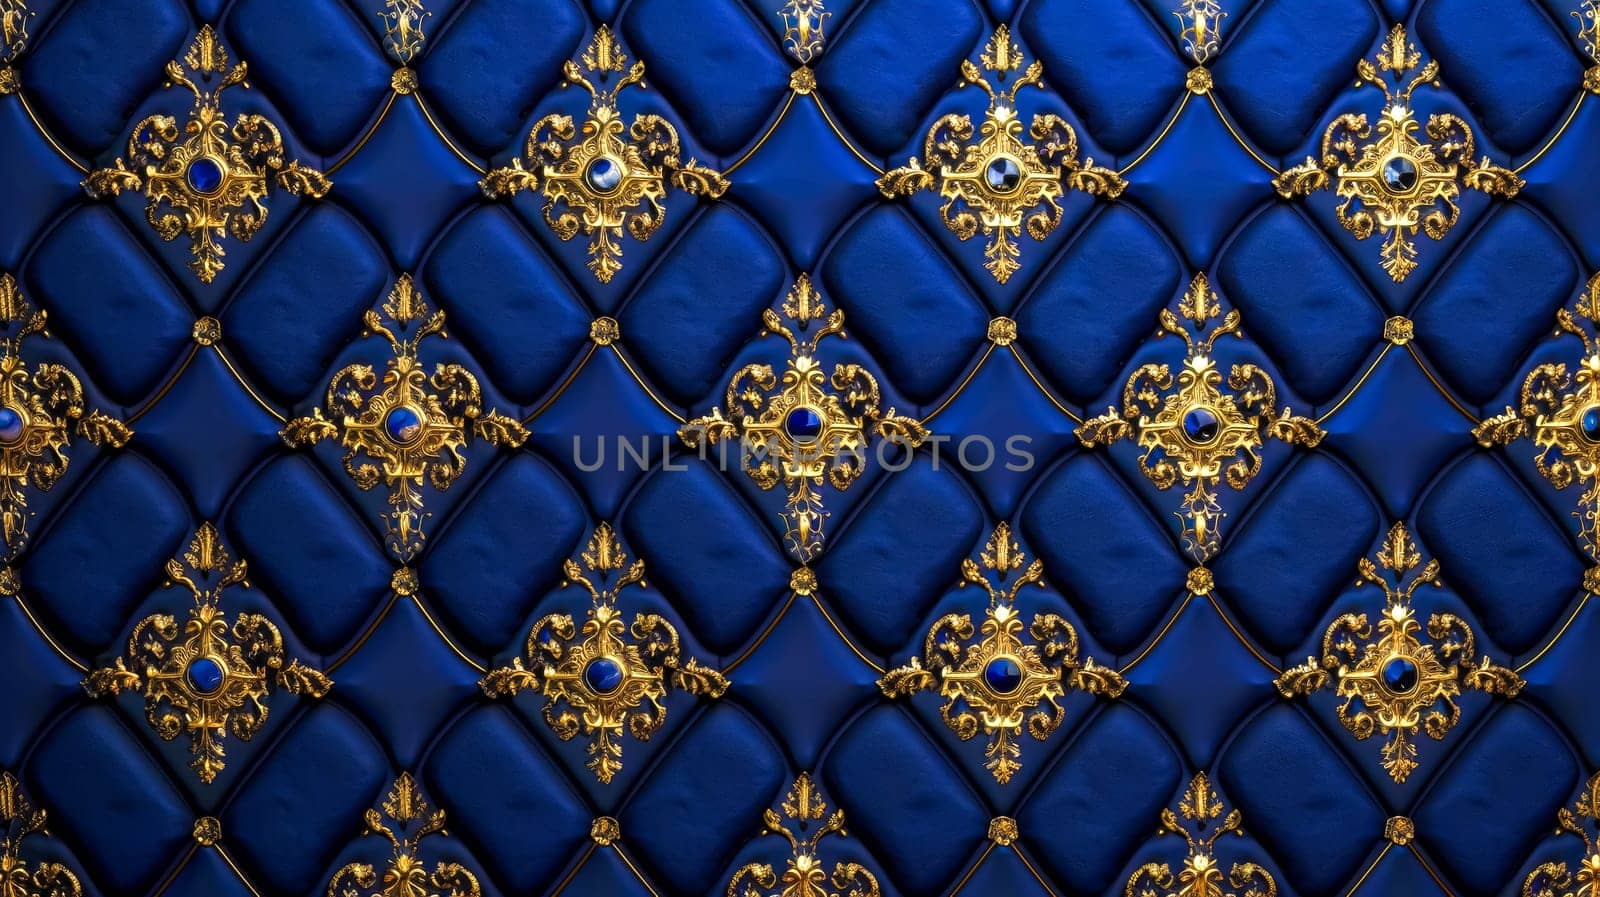 Luxurious royal blue and gold wallpaper design by Edophoto